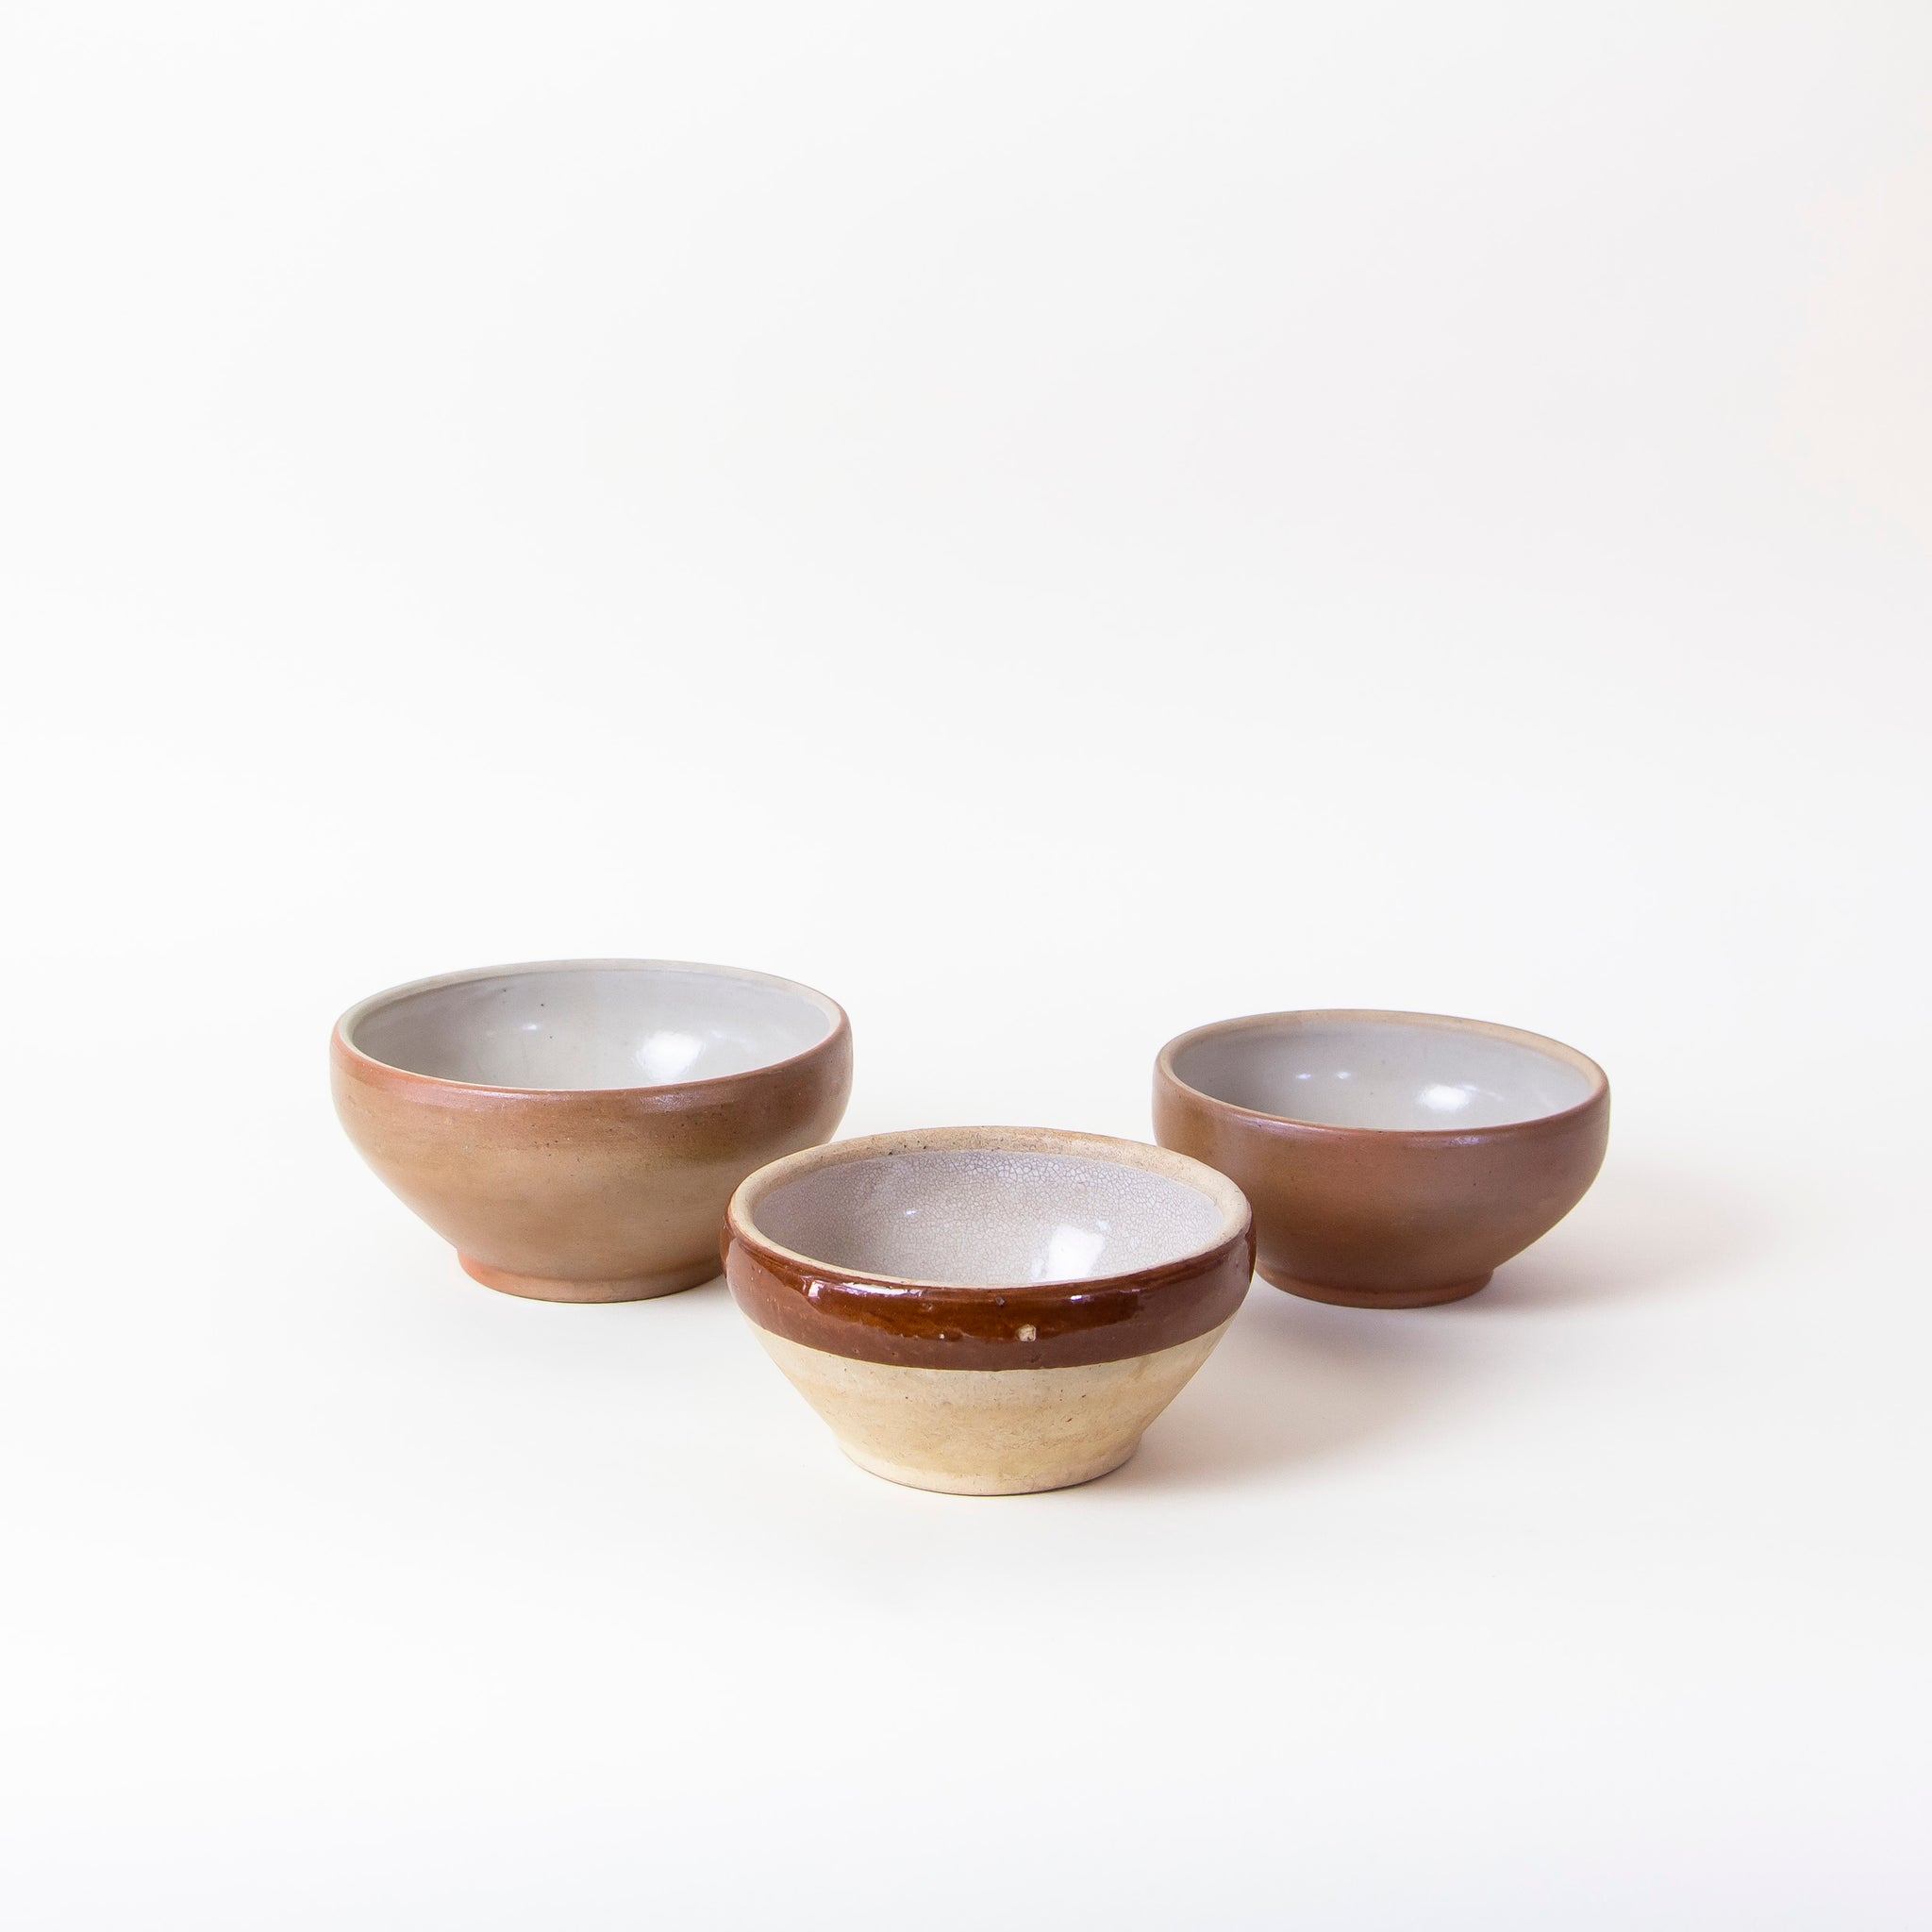 Antique French Stoneware Tian Bowls | set of 3